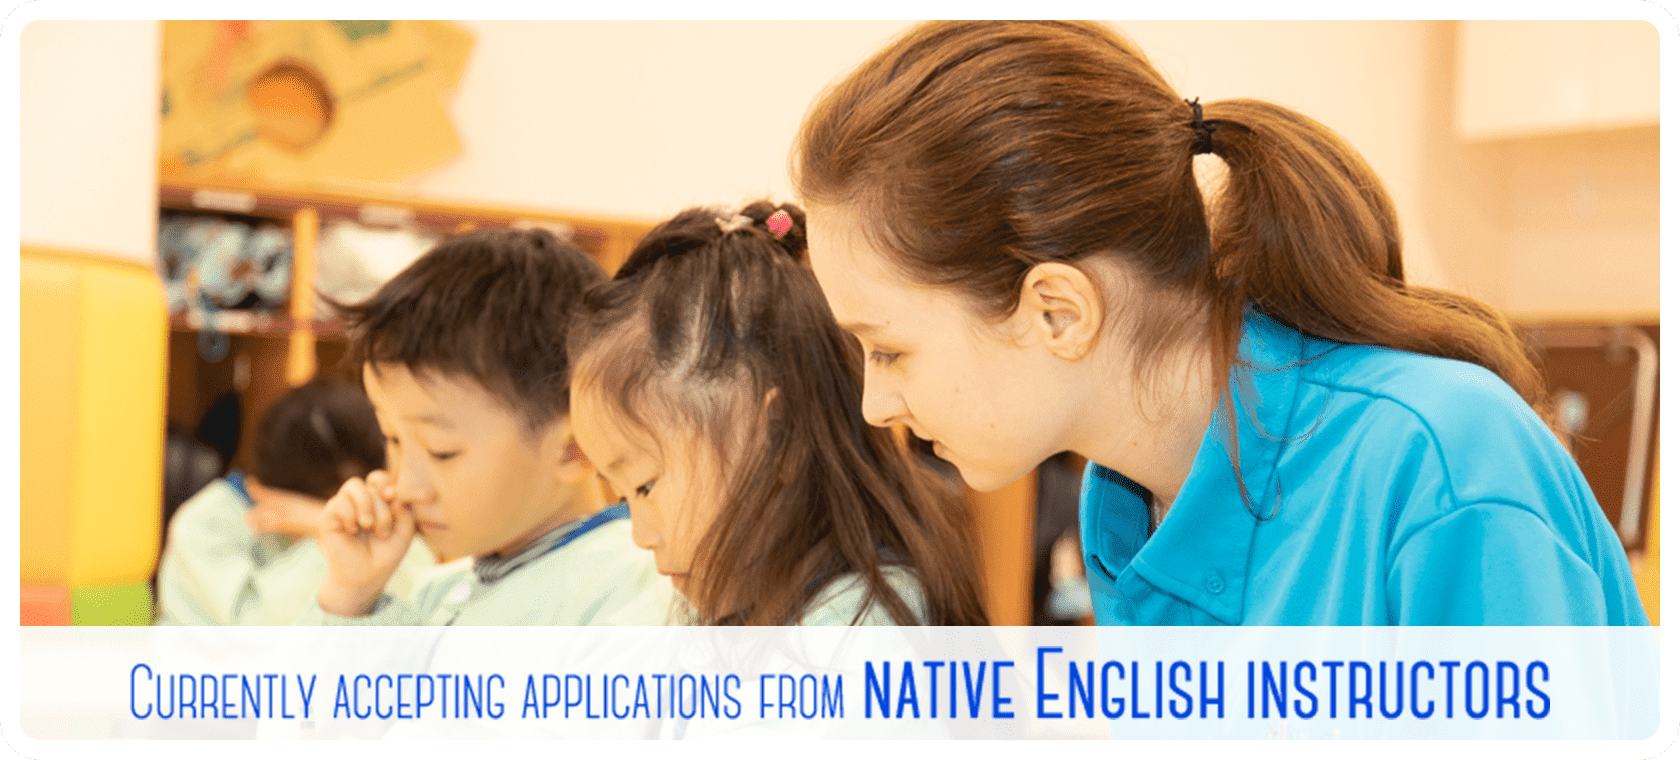 Currently accepting applications from native English instructors